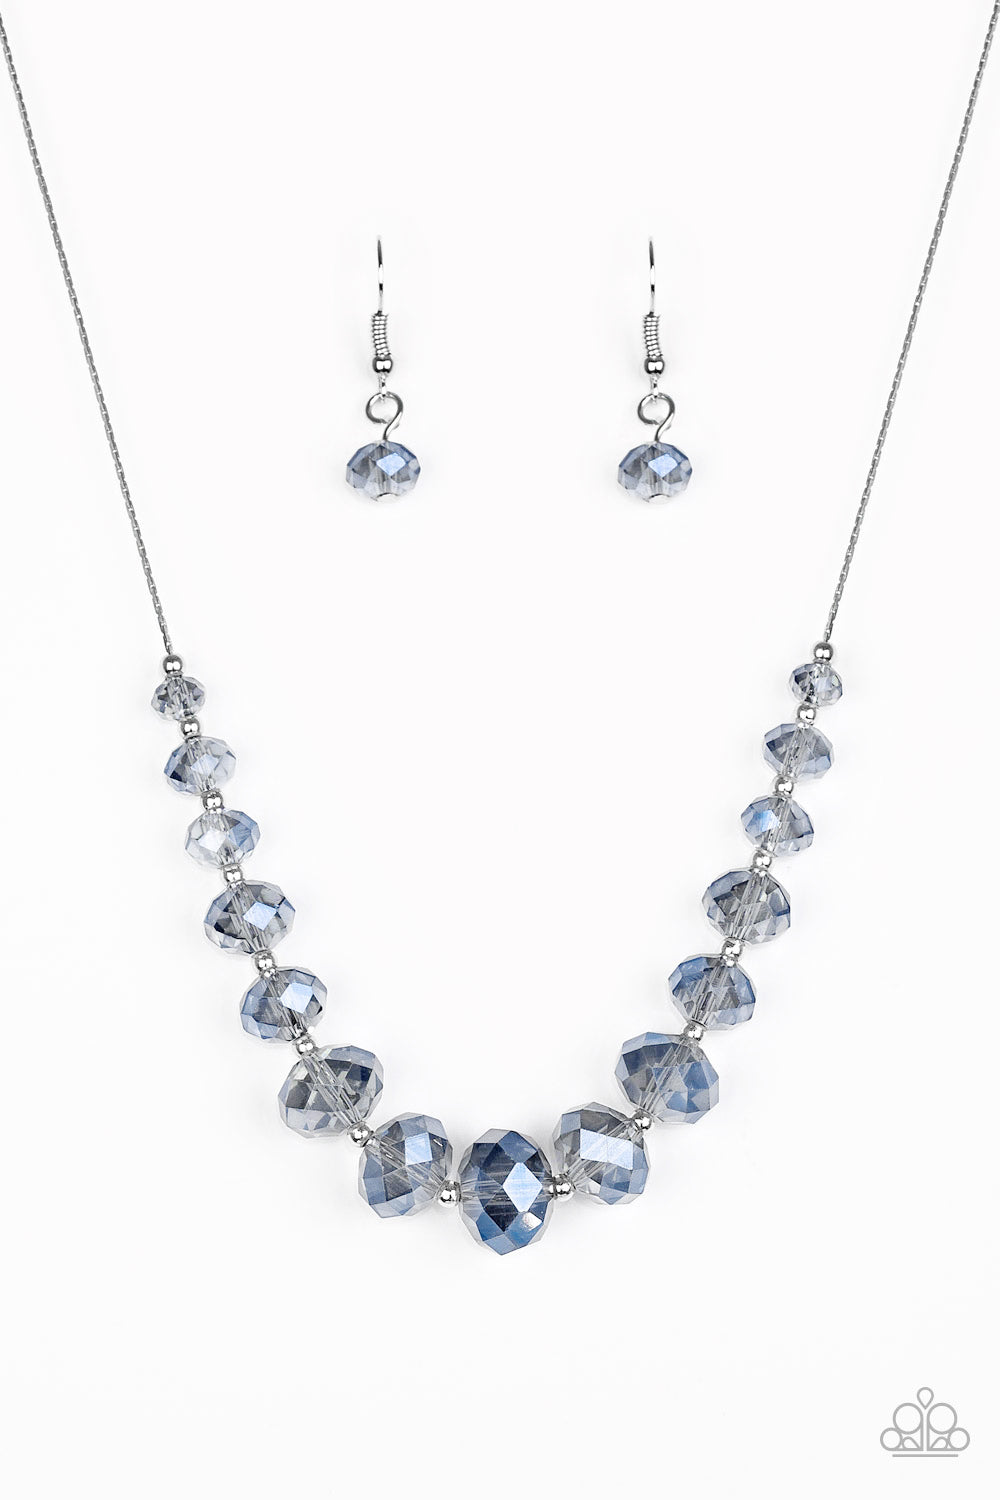 Paparazzi Crystal Carriages - Blue Necklace - Be Adored Jewelry